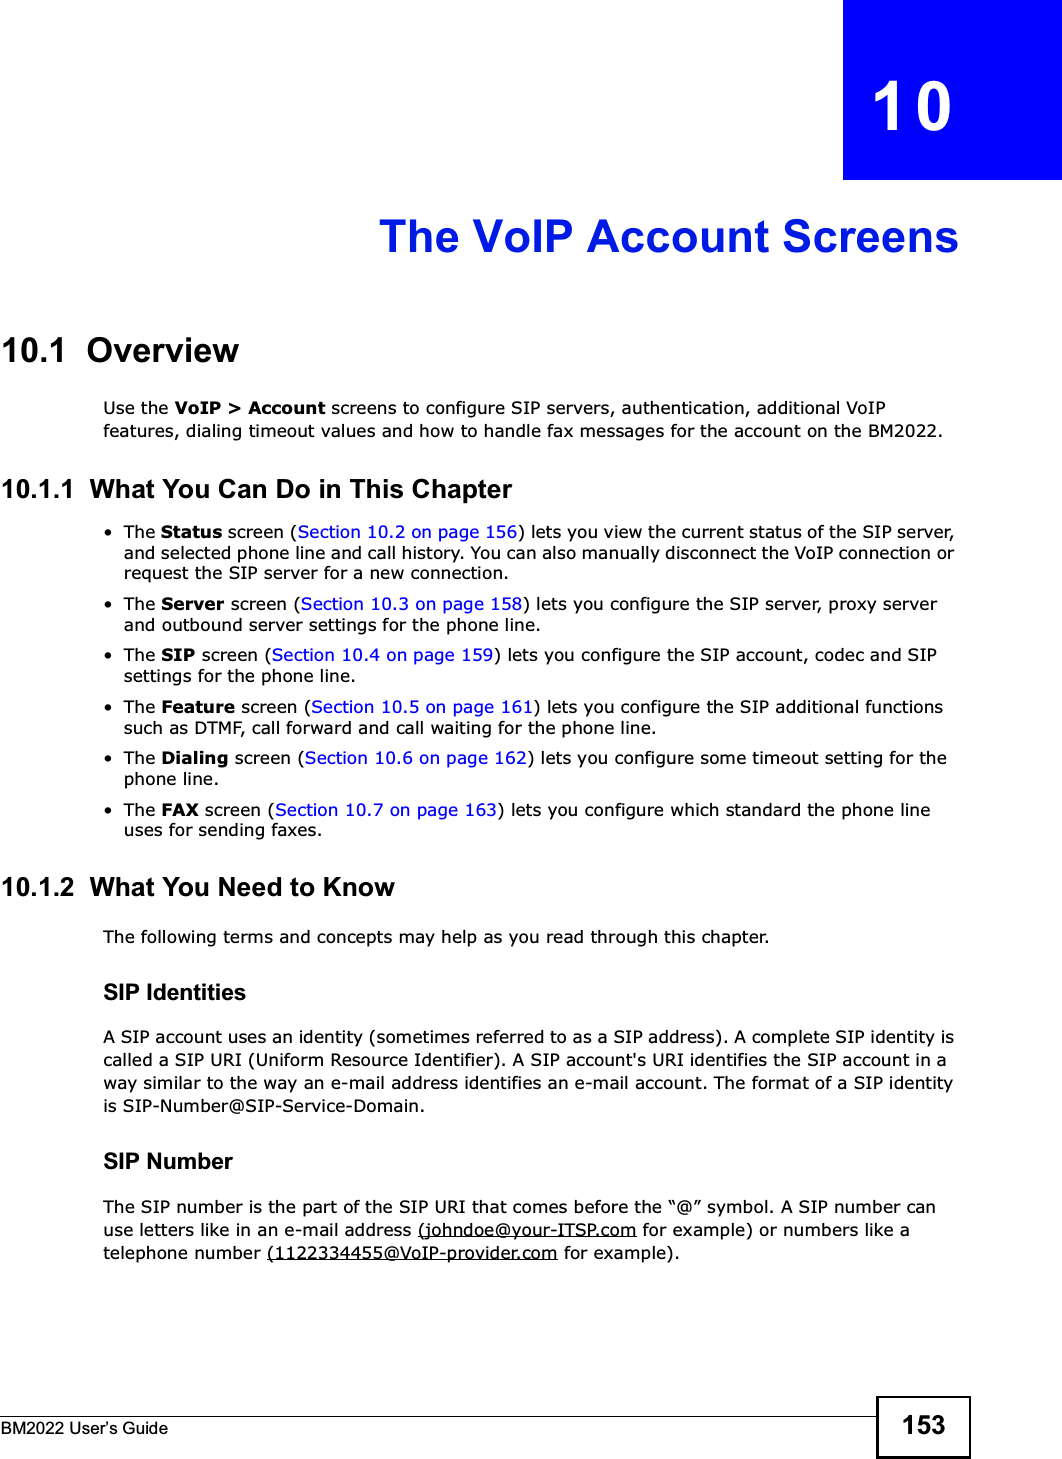 BM2022 Users Guide 153CHAPTER   10The VoIP Account Screens10.1  OverviewUse the VoIP &gt; Account screens to configure SIP servers, authentication, additional VoIP features, dialing timeout values and how to handle fax messages for the account on the BM2022.10.1.1  What You Can Do in This ChapterThe Status screen (Section 10.2 on page 156) lets you view the current status of the SIP server, and selected phone line and call history. You can also manually disconnect the VoIP connection or request the SIP server for a new connection.The Server screen (Section 10.3 on page 158) lets you configure the SIP server, proxy server and outbound server settings for the phone line.The SIP screen (Section 10.4 on page 159) lets you configure the SIP account, codec and SIP settings for the phone line.The Feature screen (Section 10.5 on page 161) lets you configure the SIP additional functions such as DTMF, call forward and call waiting for the phone line.The Dialing screen (Section 10.6 on page 162) lets you configure some timeout setting for the phone line.The FAX screen (Section 10.7 on page 163) lets you configure which standard the phone line uses for sending faxes.10.1.2  What You Need to KnowThe following terms and concepts may help as you read through this chapter.SIP IdentitiesA SIP account uses an identity (sometimes referred to as a SIP address). A complete SIP identity is called a SIP URI (Uniform Resource Identifier). A SIP account&apos;s URI identifies the SIP account in a way similar to the way an e-mail address identifies an e-mail account. The format of a SIP identity is SIP-Number@SIP-Service-Domain.SIP NumberThe SIP number is the part of the SIP URI that comes before the @ symbol. A SIP number can use letters like in an e-mail address (johndoe@your-ITSP.com for example) or numbers like a telephone number (1122334455@VoIP-provider.com for example).